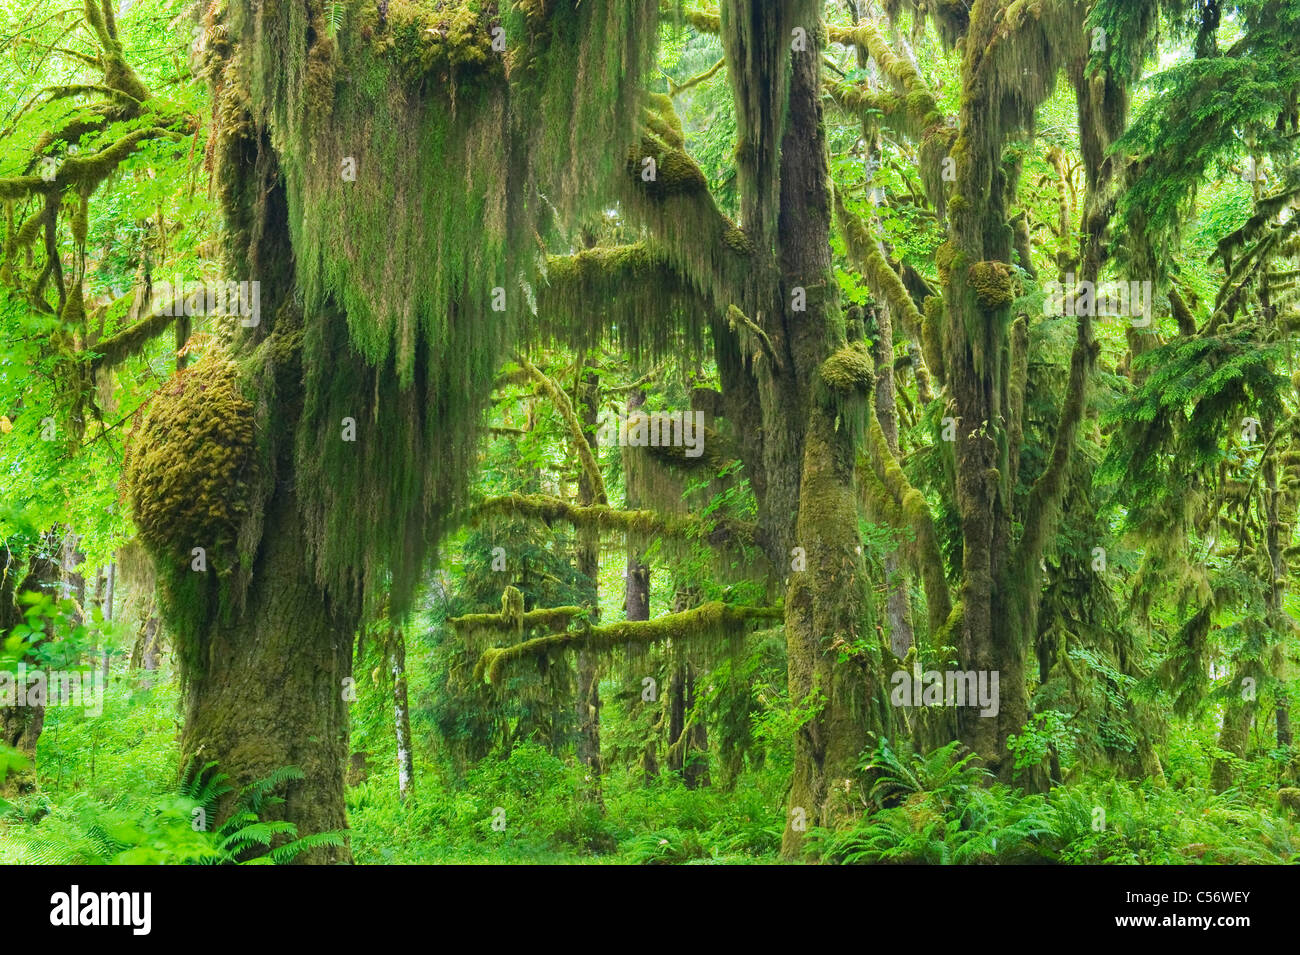 Moss-draped Bigleaf Maples, Temperate Rainforest, Hoh River Valley, Olympic National Park, Washington Stock Photo